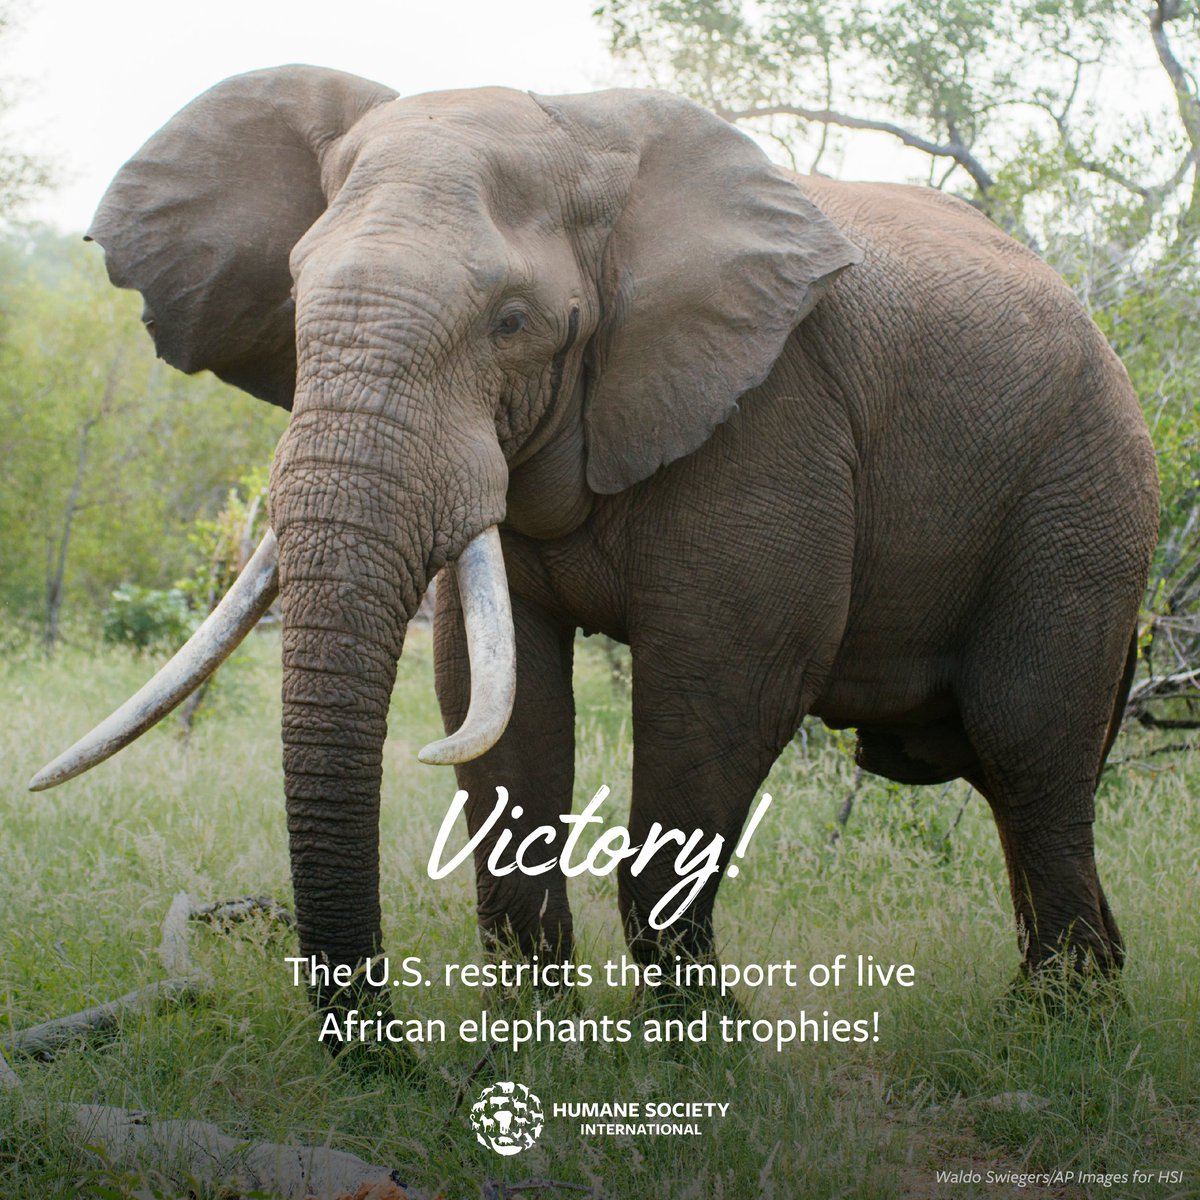 🐘 Big news! 🎉 The U.S. has increased federal protections for African elephants, providing better scrutiny and restrictions for the import of live African elephants and their hunting trophies thanks to your support and our ongoing advocacy efforts. HSI remains committed to…